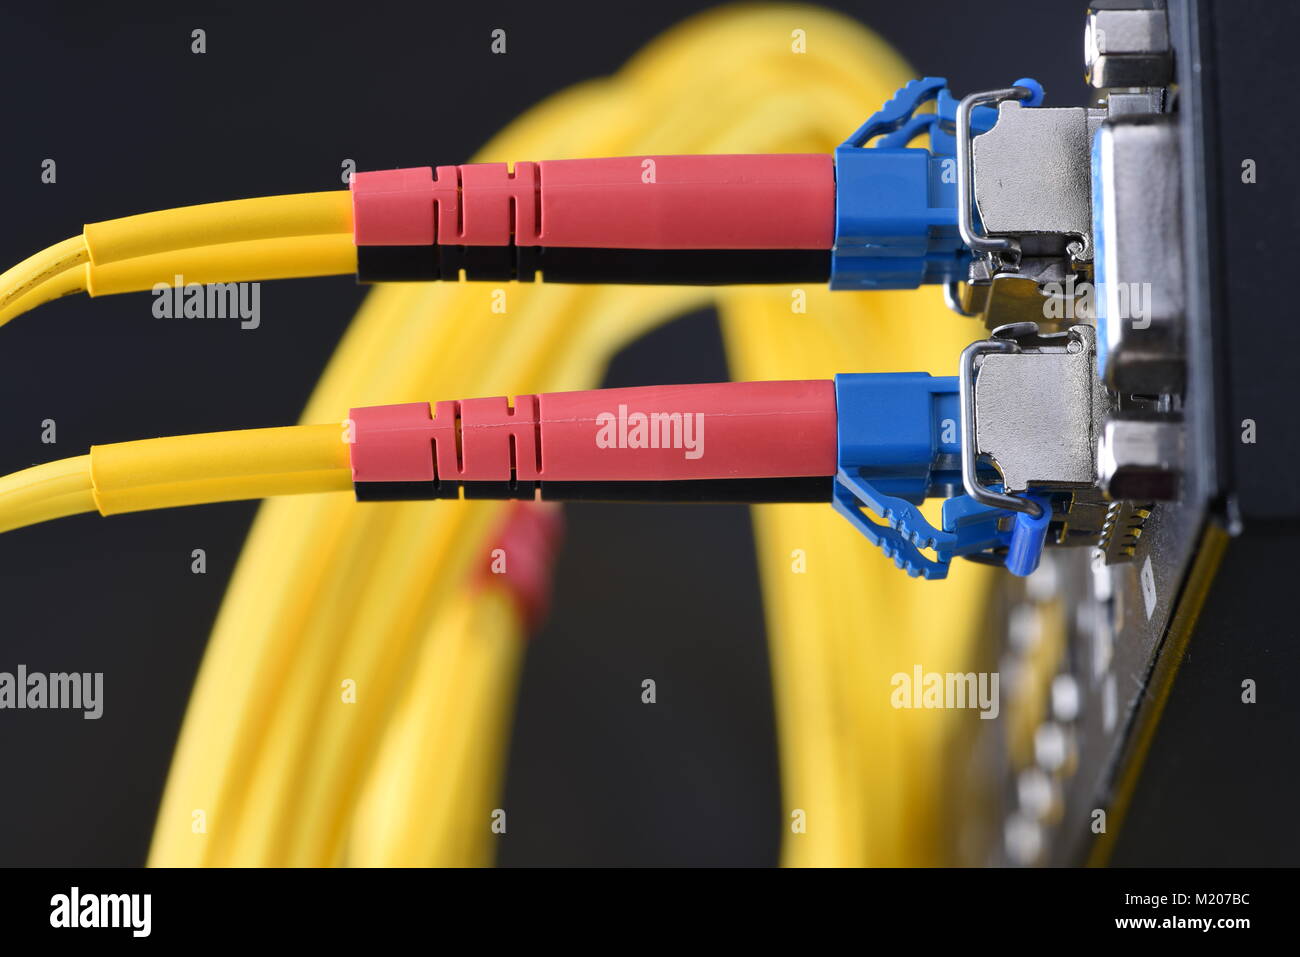 Internet network technology, fiber optic cable connected to switch in data center, close-up Stock Photo